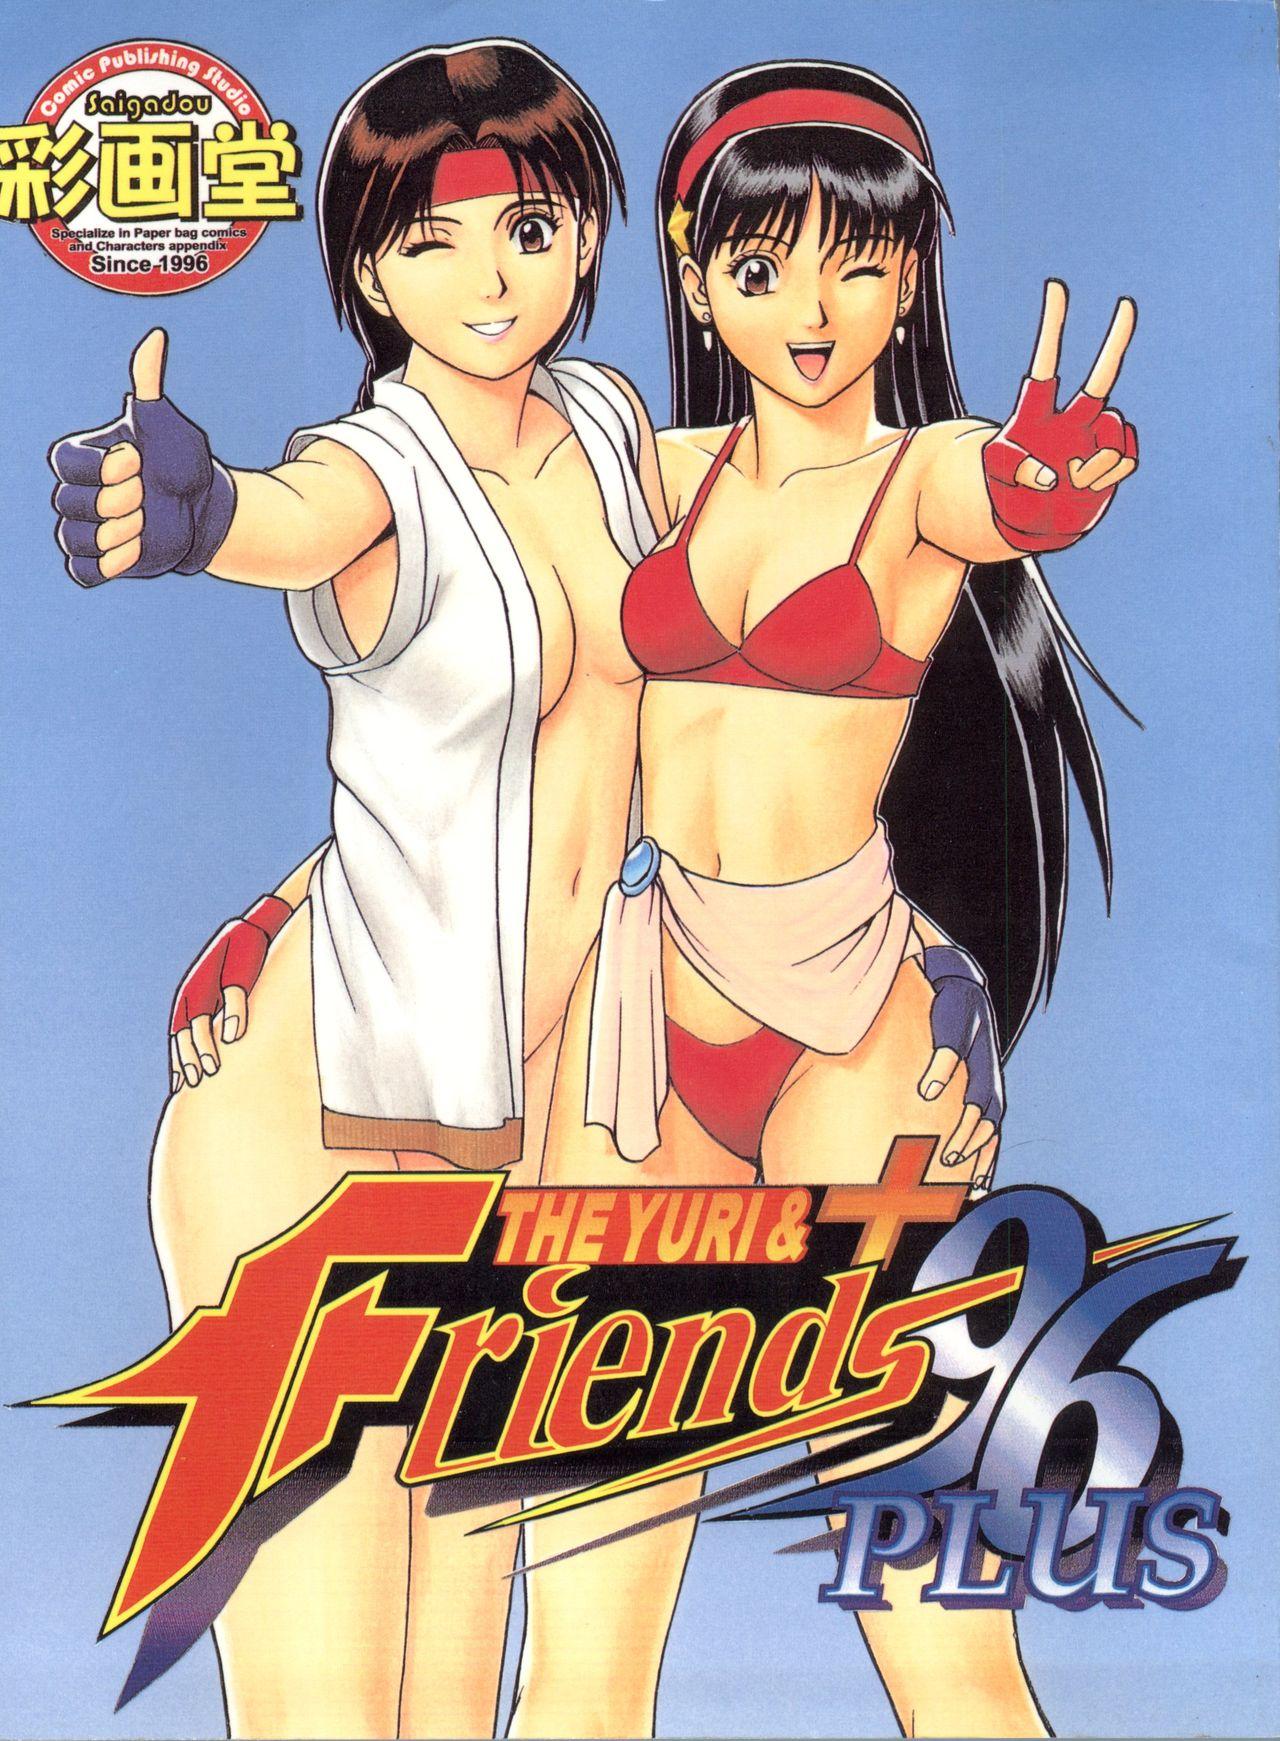 Arabic The Yuri&Friends '96 Plus - King of fighters Gay Shaved - Picture 1